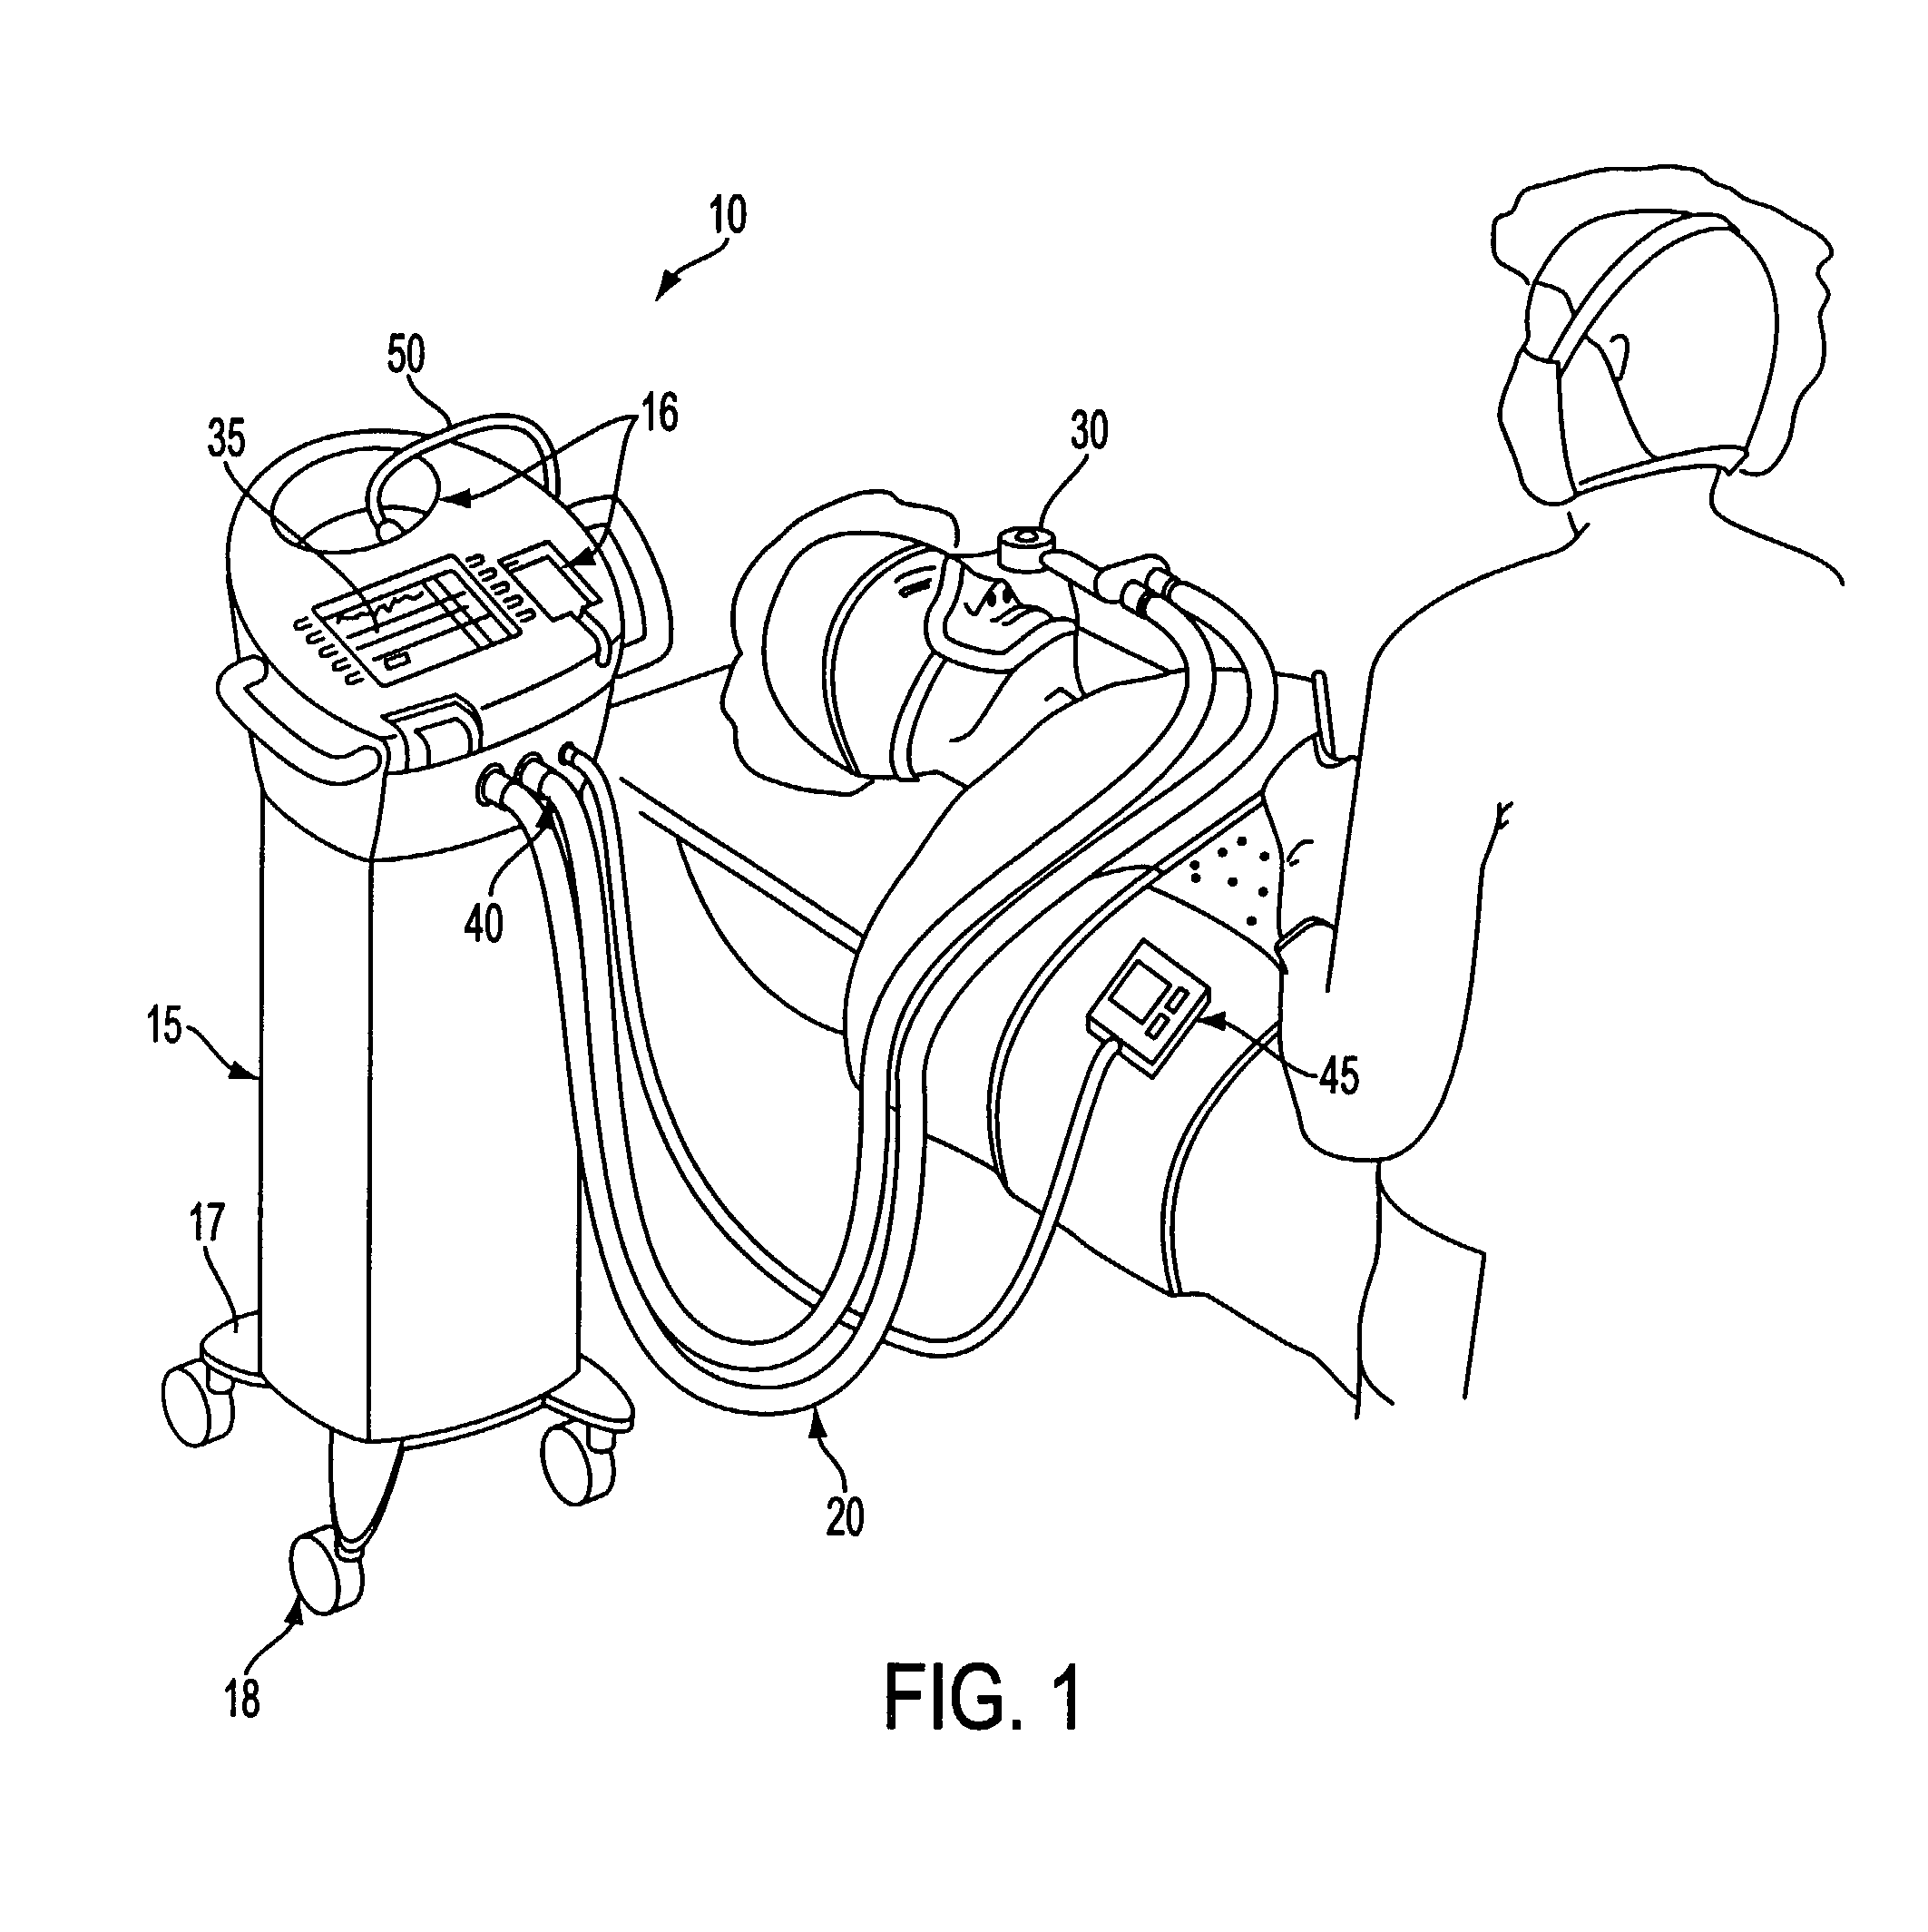 Apparatuses and methods for automatically assessing and monitoring a patient's responsiveness